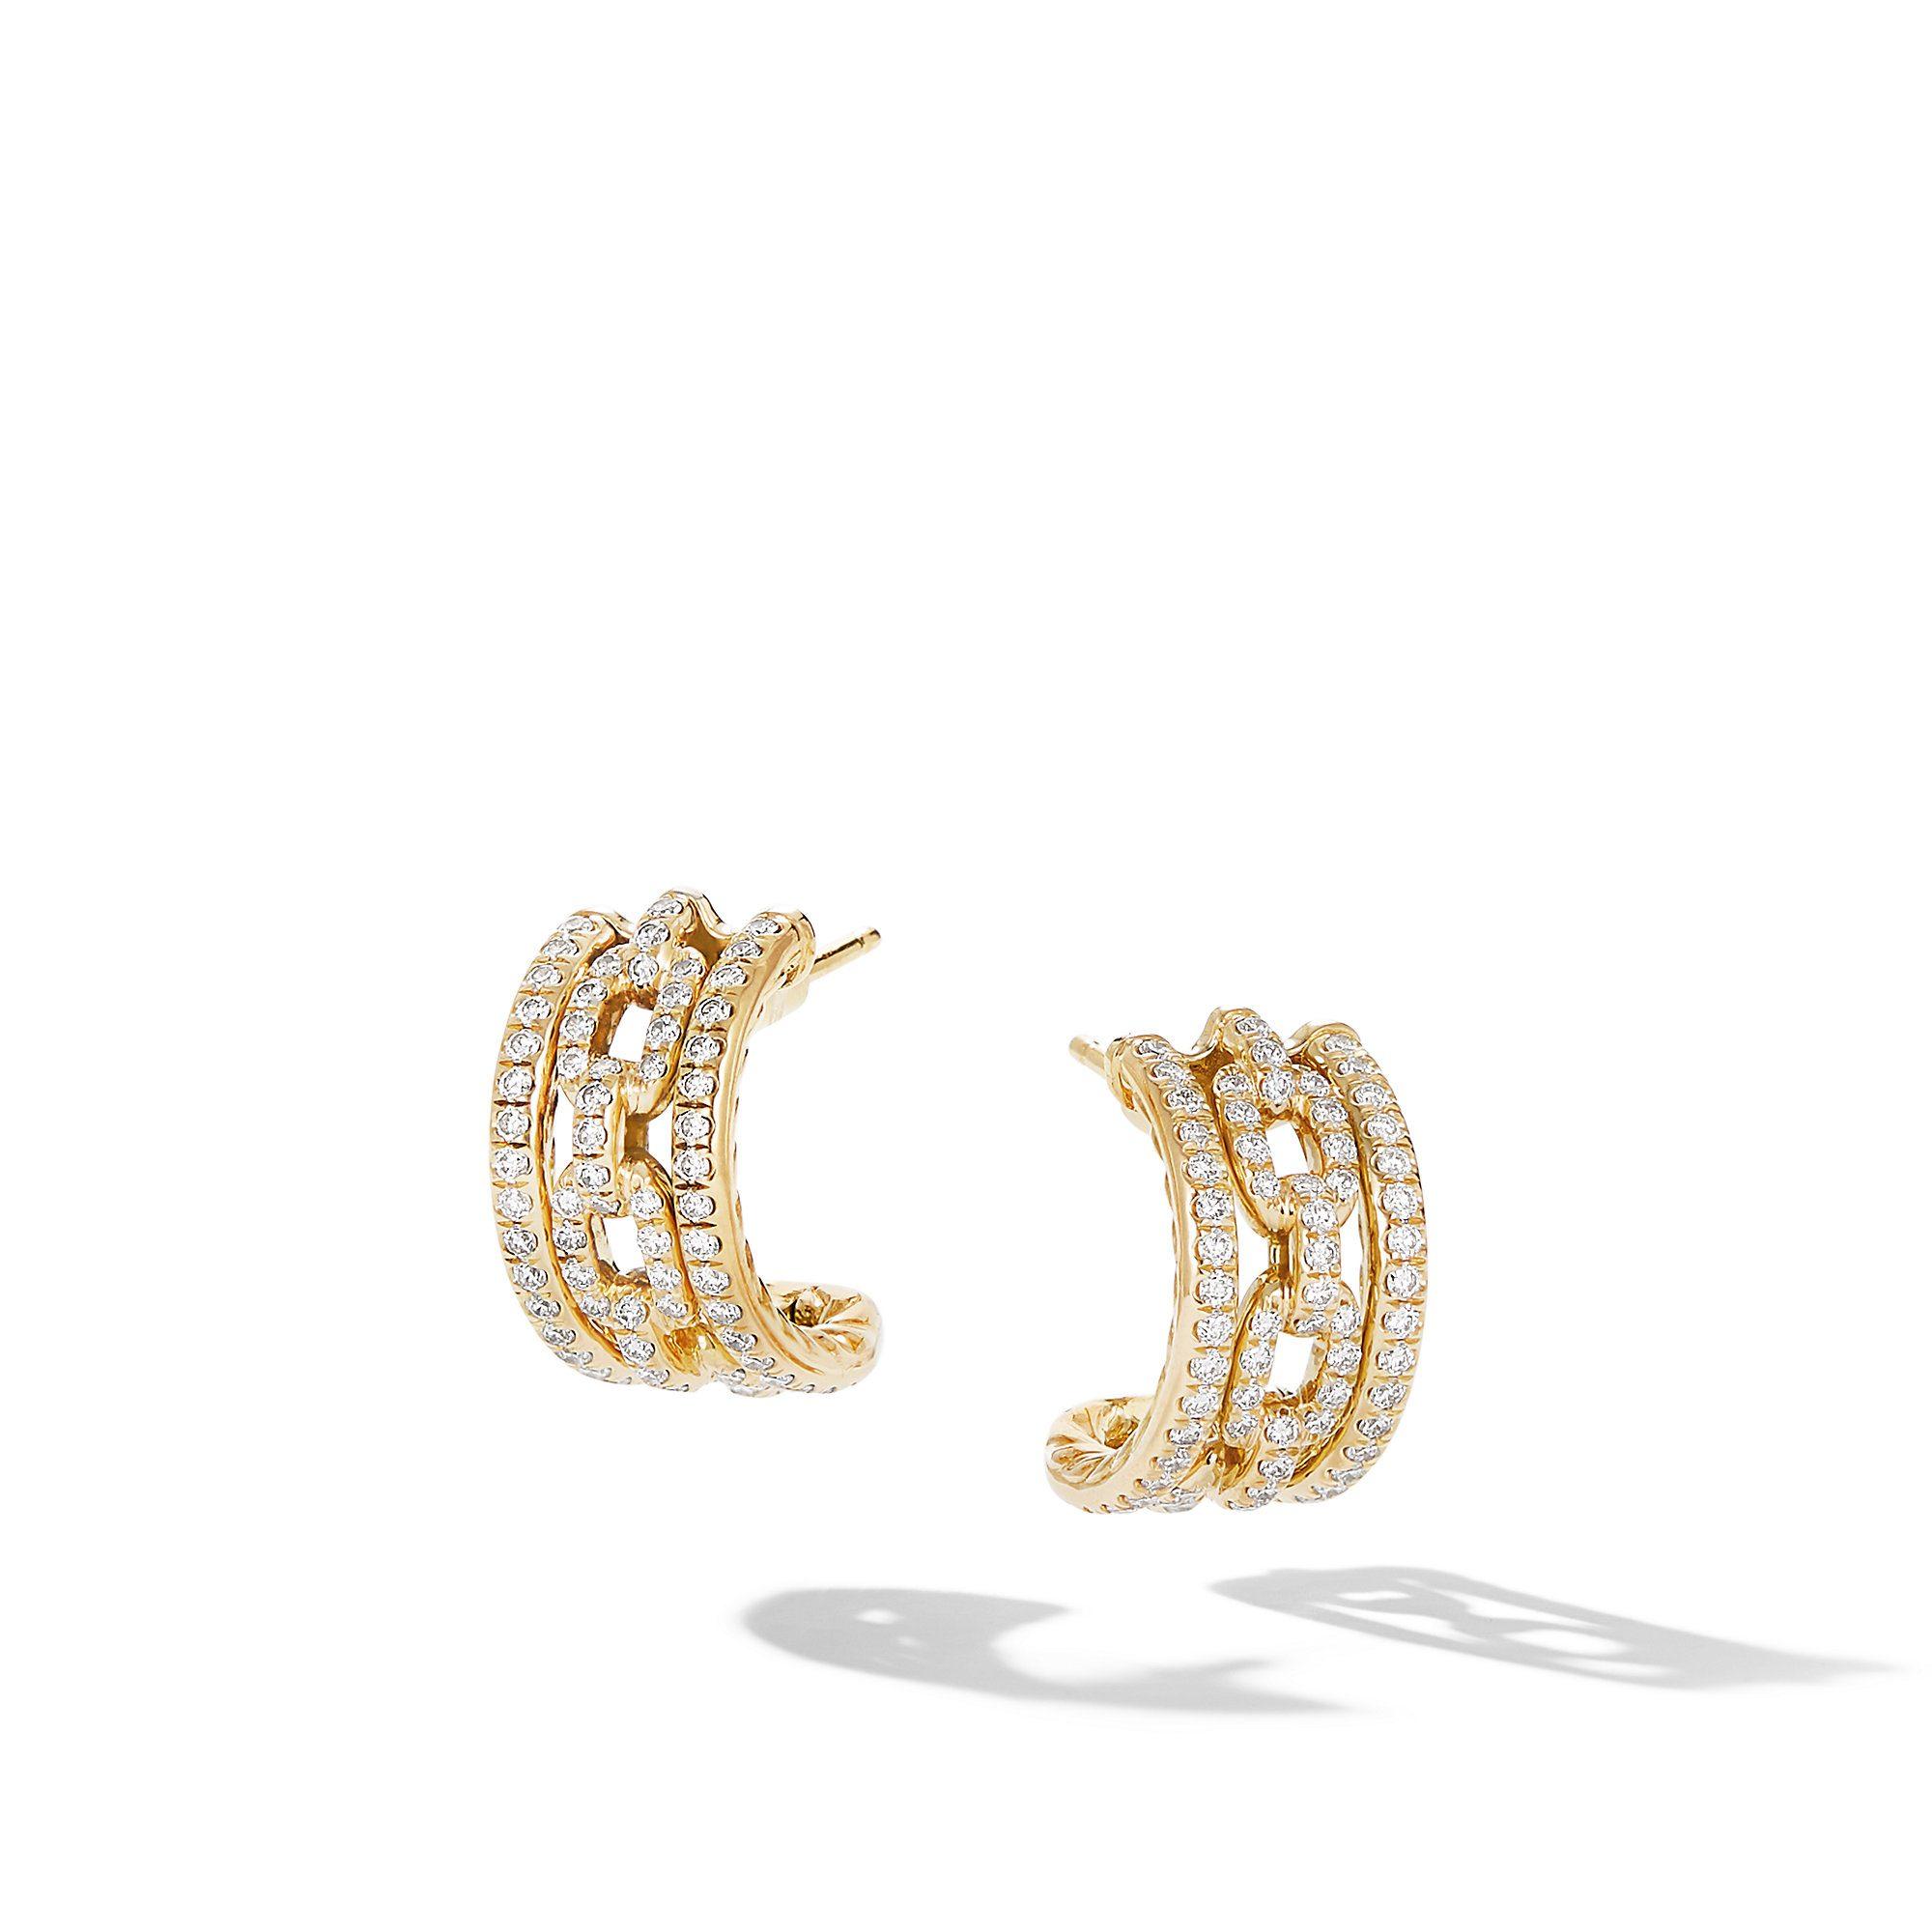 David Yurman Stax Chain Link and Pave Huggie Hoops in 18k Yellow Gold